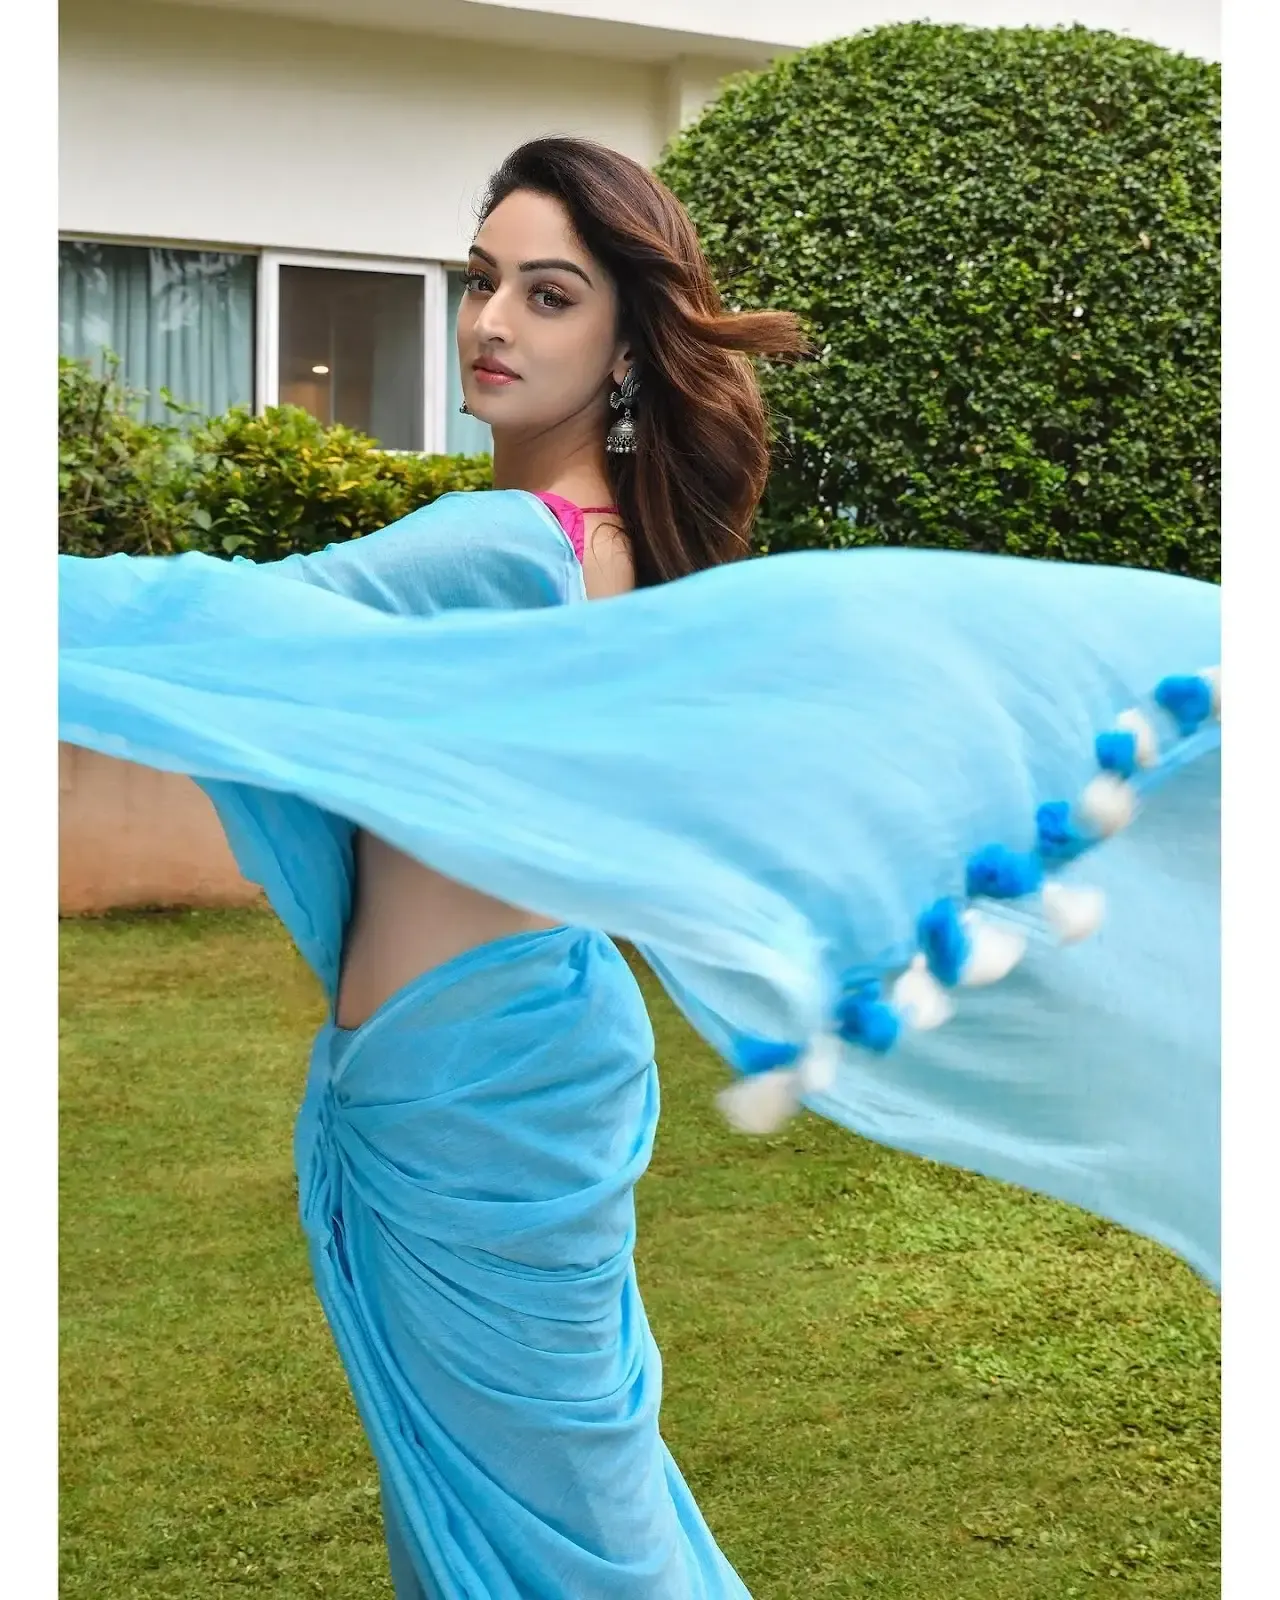 NORTH INDIAN ACTRESS SANDEEPA DHAR IMAGES IN TRADITIONAL BLUE SAREE 3